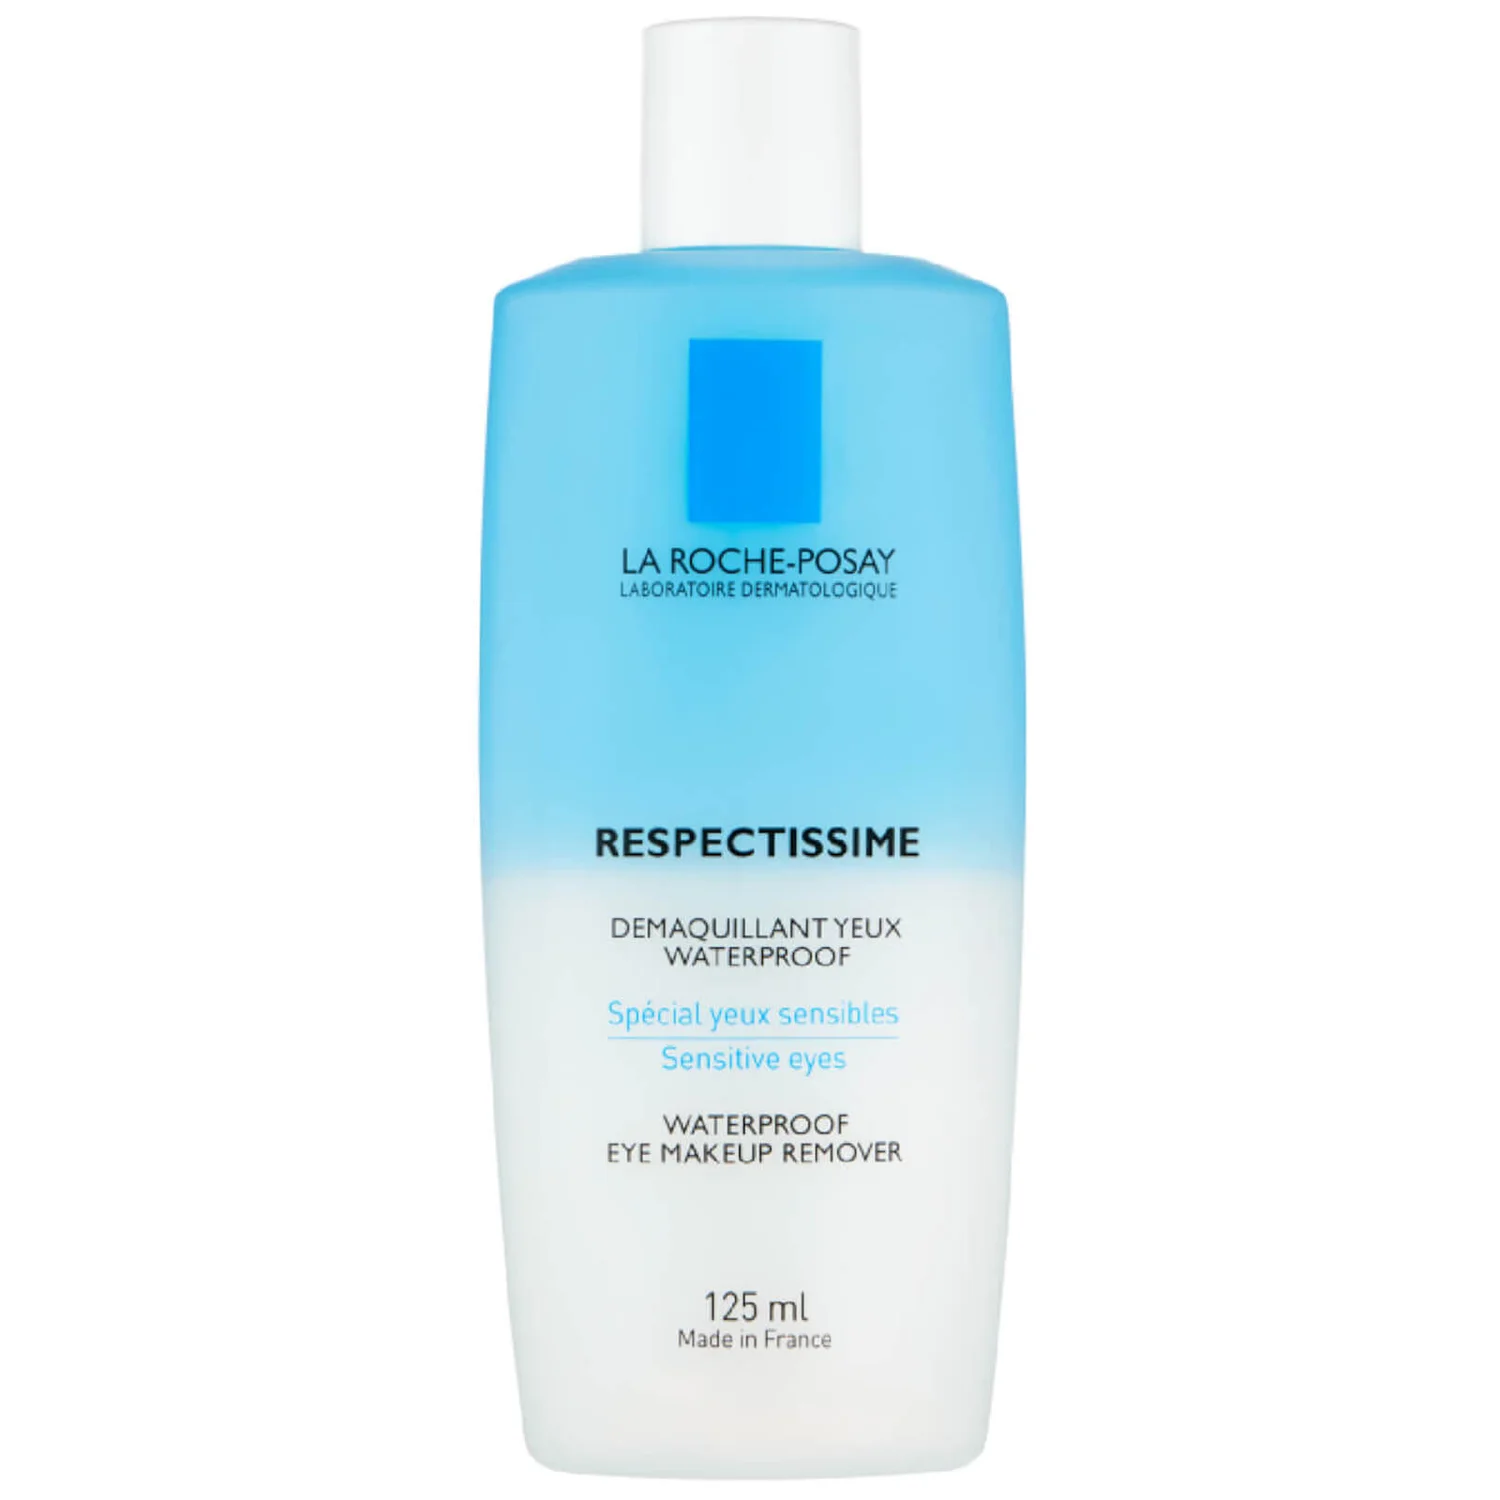 La Roche-Posay Respectissime Waterproof Eye Make-Up Remover 125ml How to stop sweating your make up off at the gym